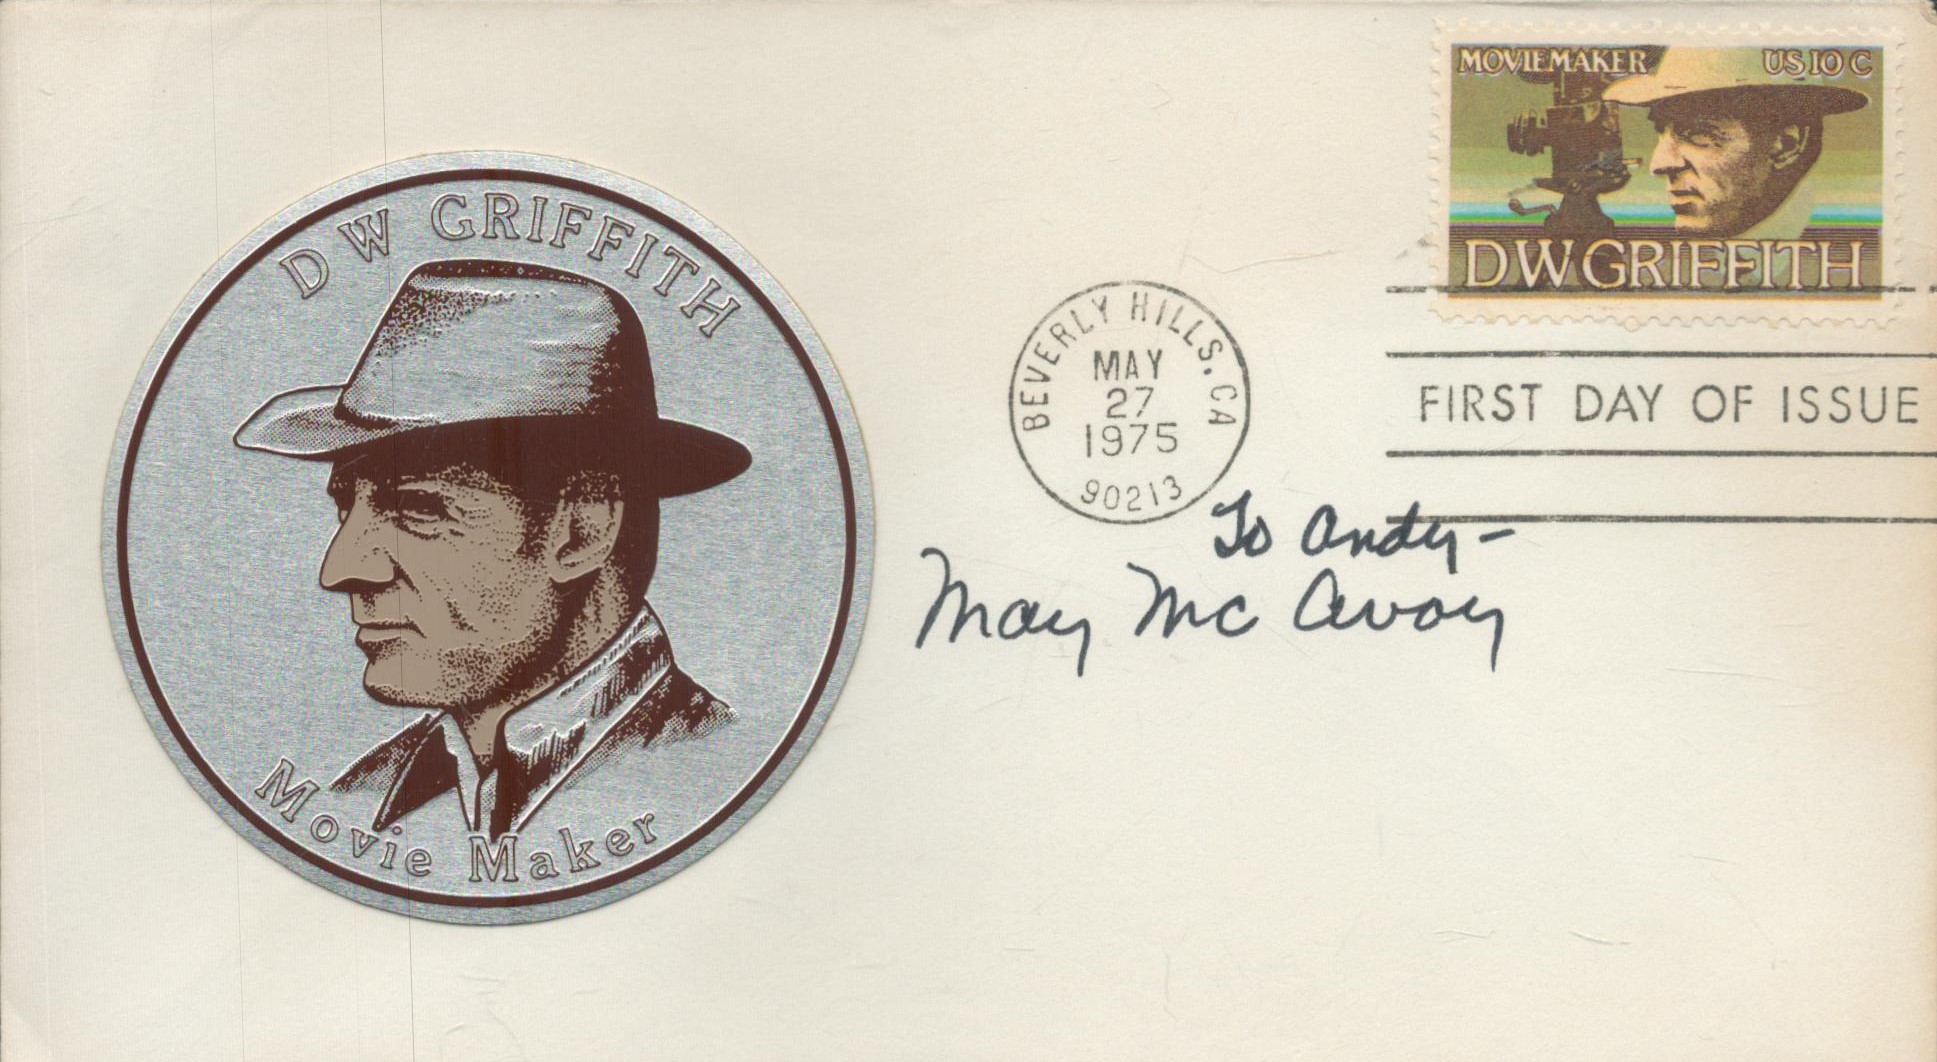 May McAvoy signed FDC 'D W Griffith Movie Maker' Single Stamp FDI 27 May 1975 post marked Beverly